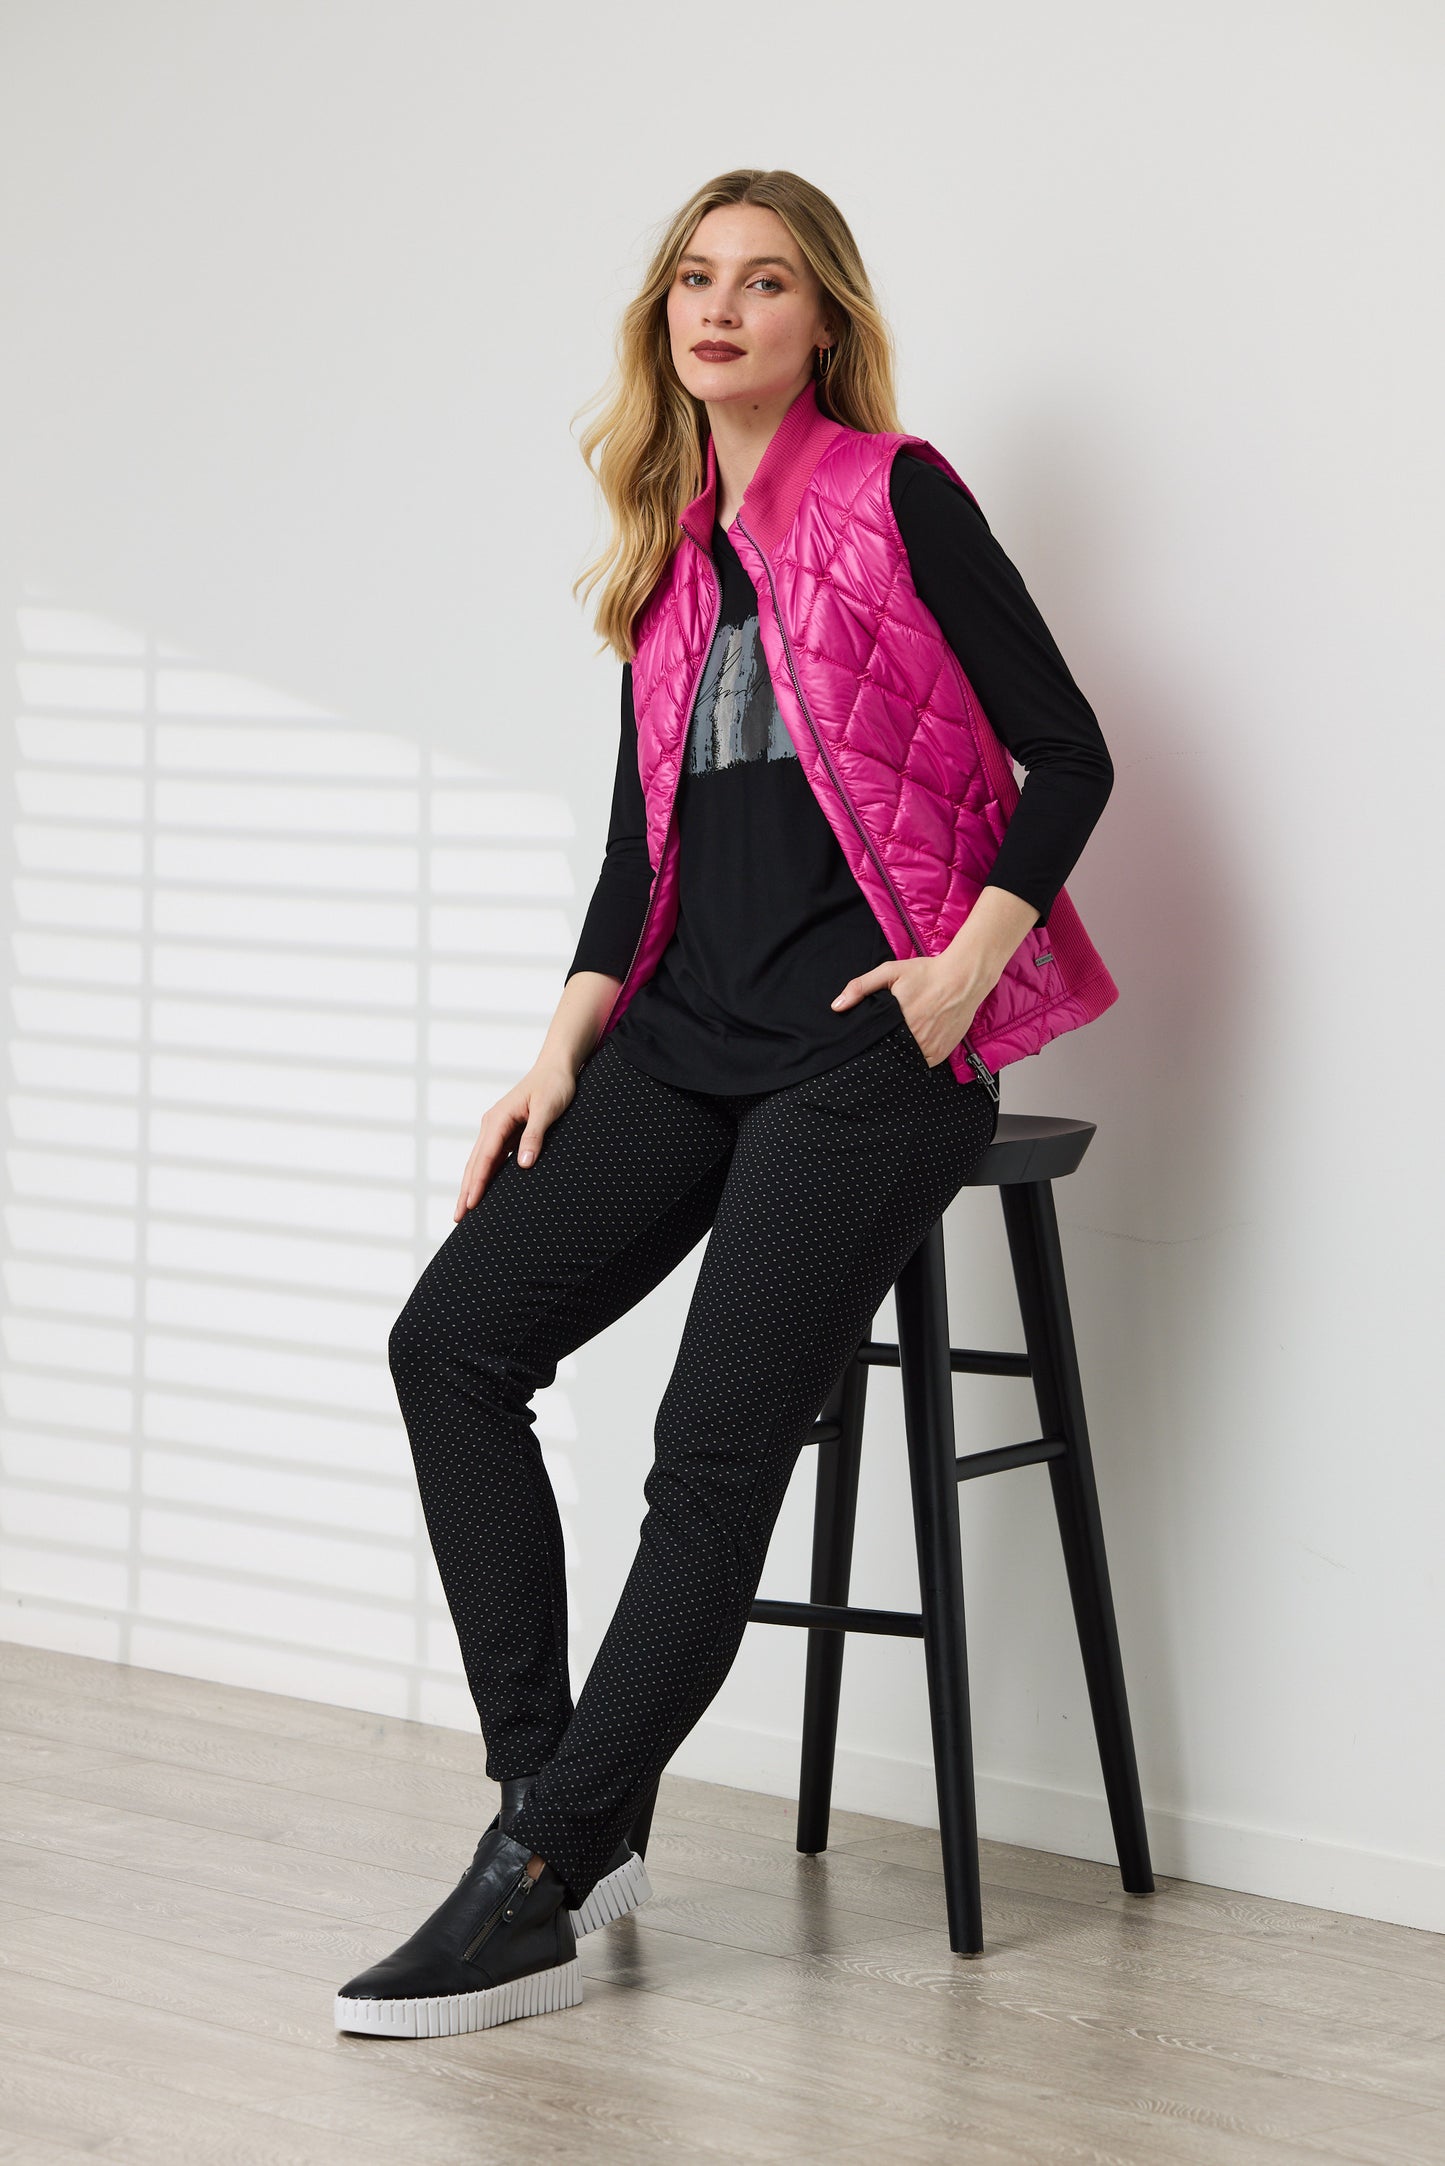 Newport - Quilted Vest - NP26418 - Orchid - INSTORE